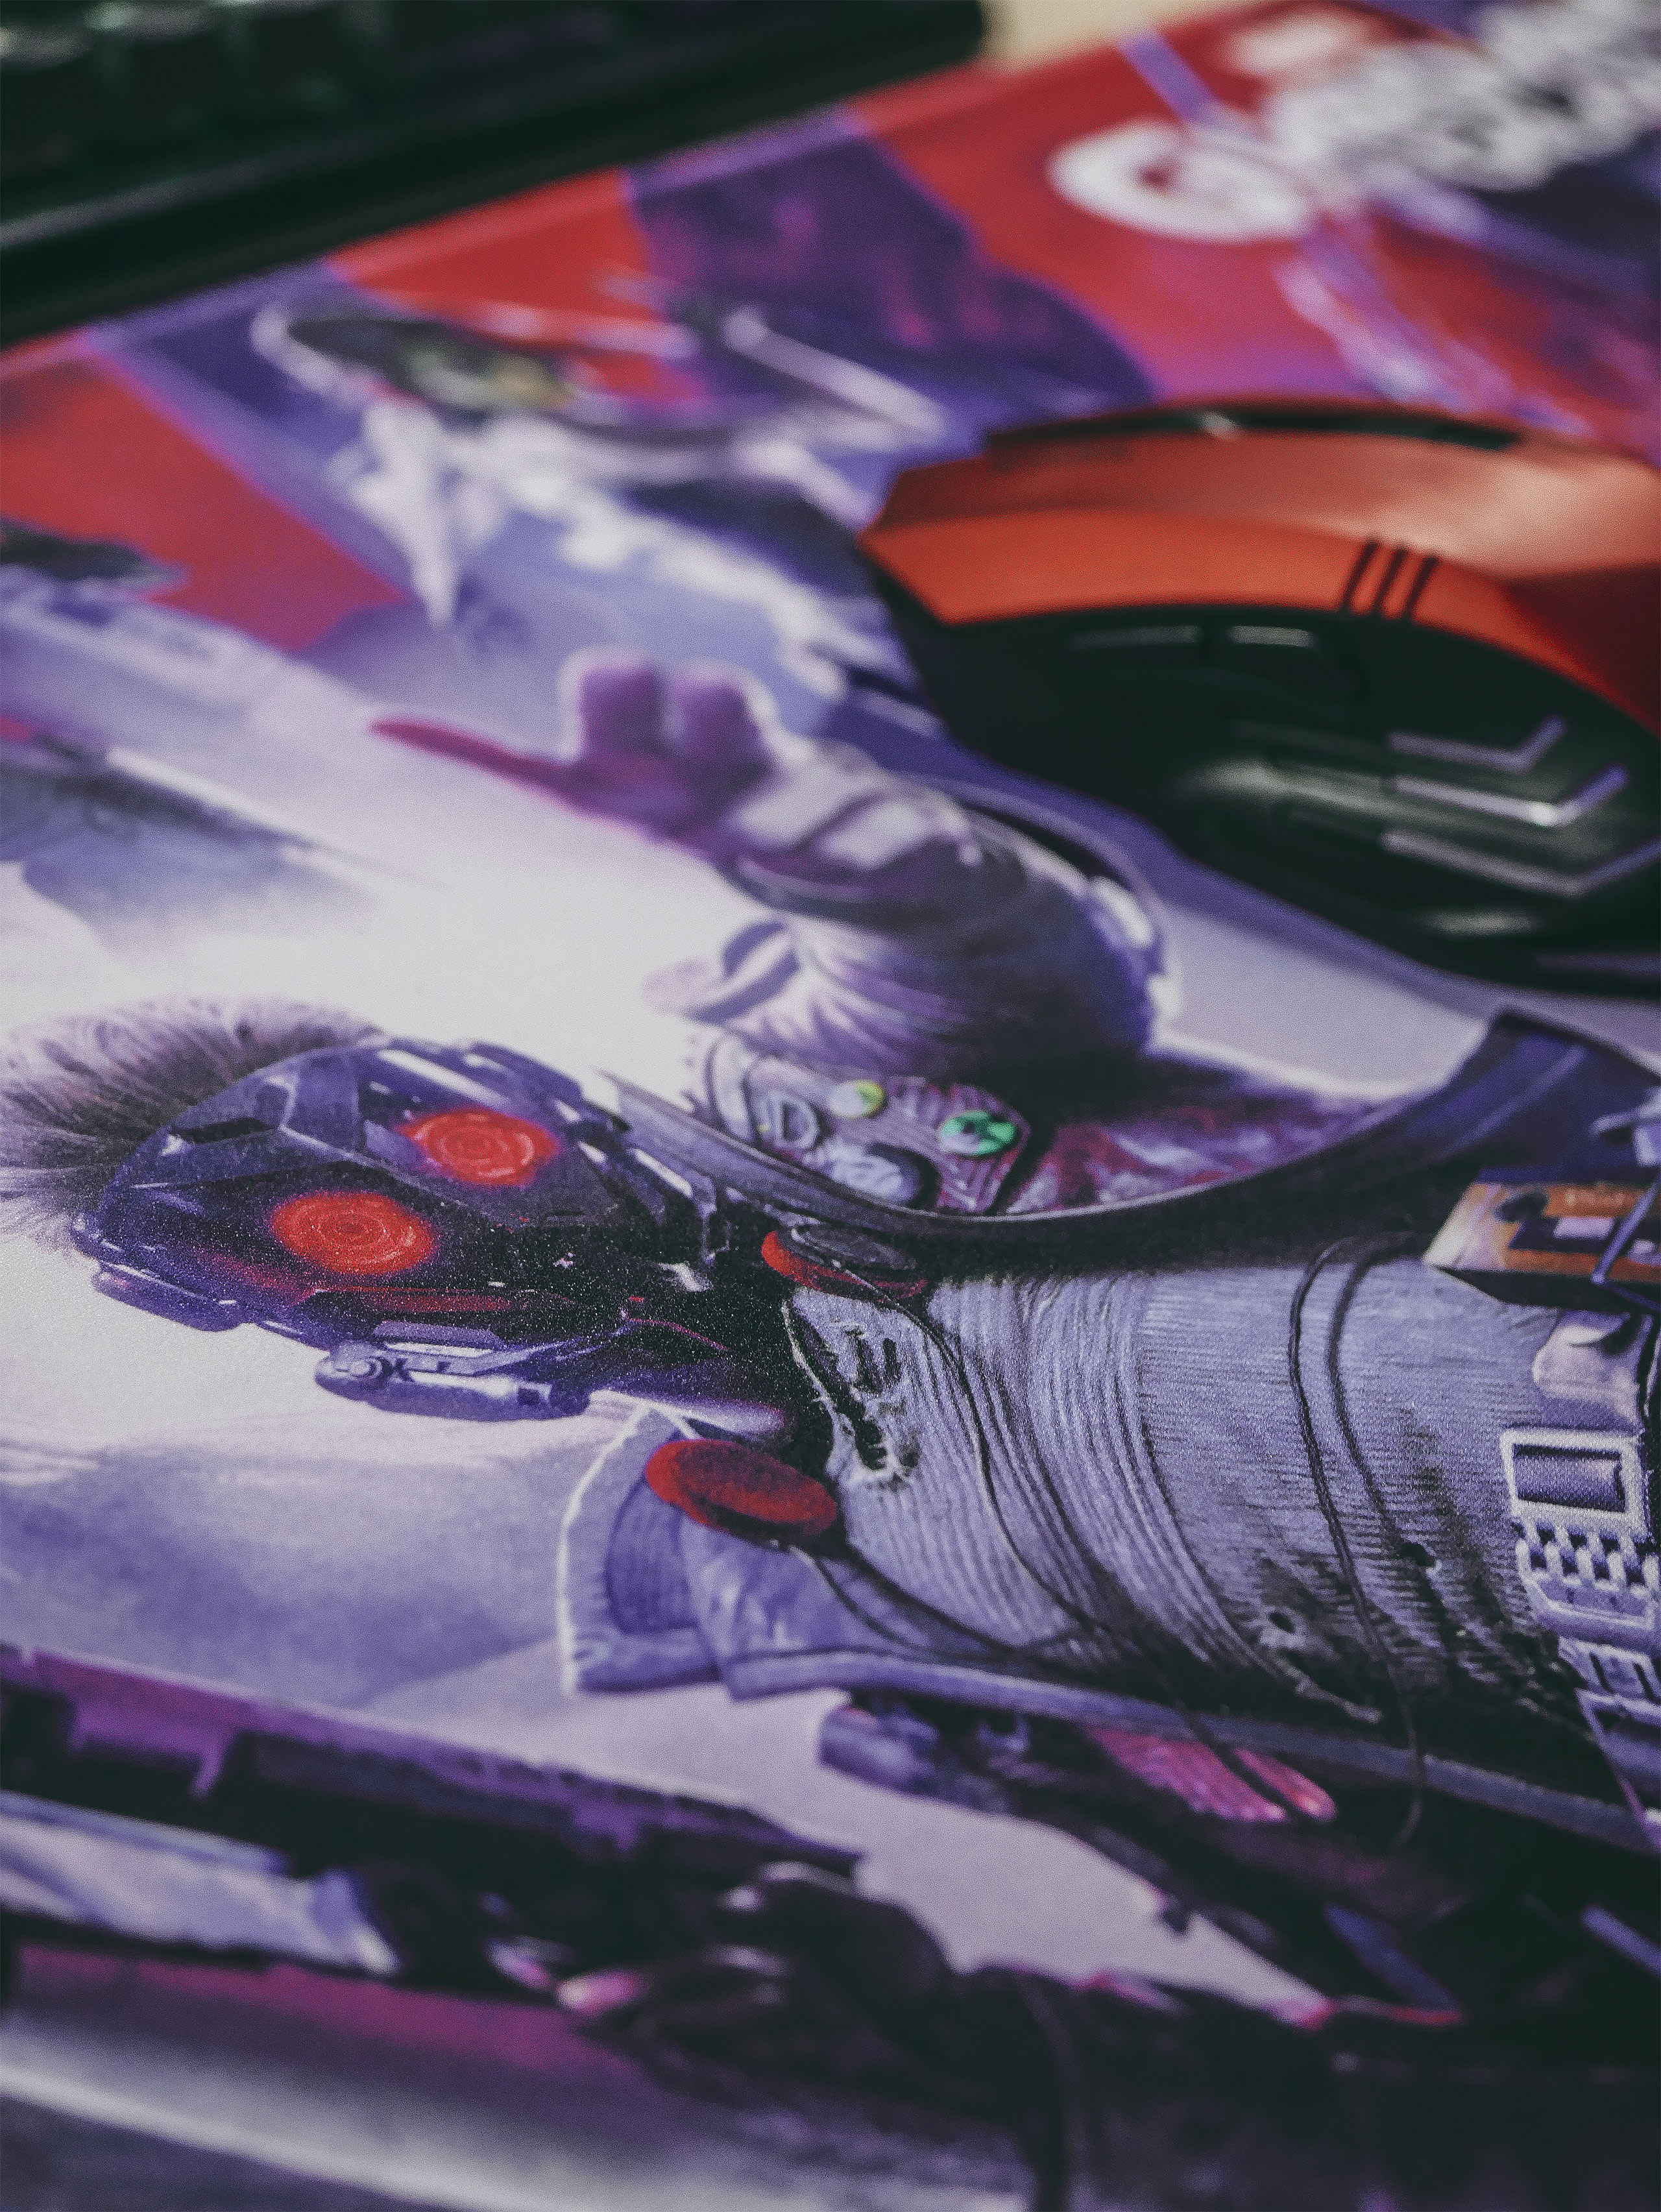 Guardians of the Galaxy - Mousepad